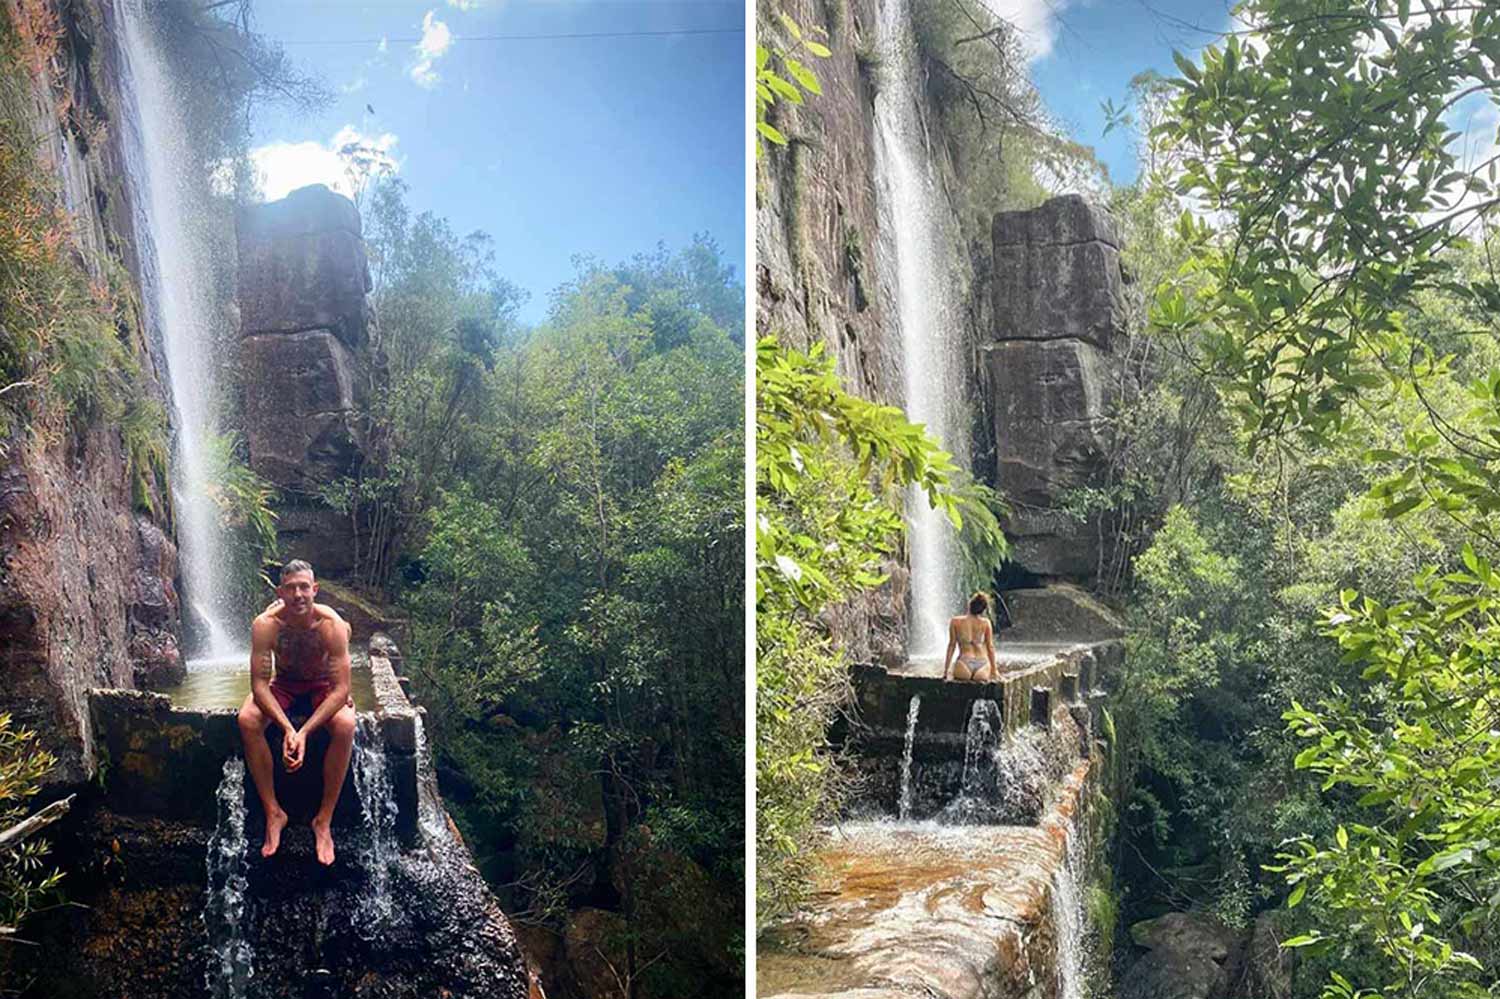 Influencers May Be Bathing In ‘Sewage Water’ At Popular Australian Waterfall